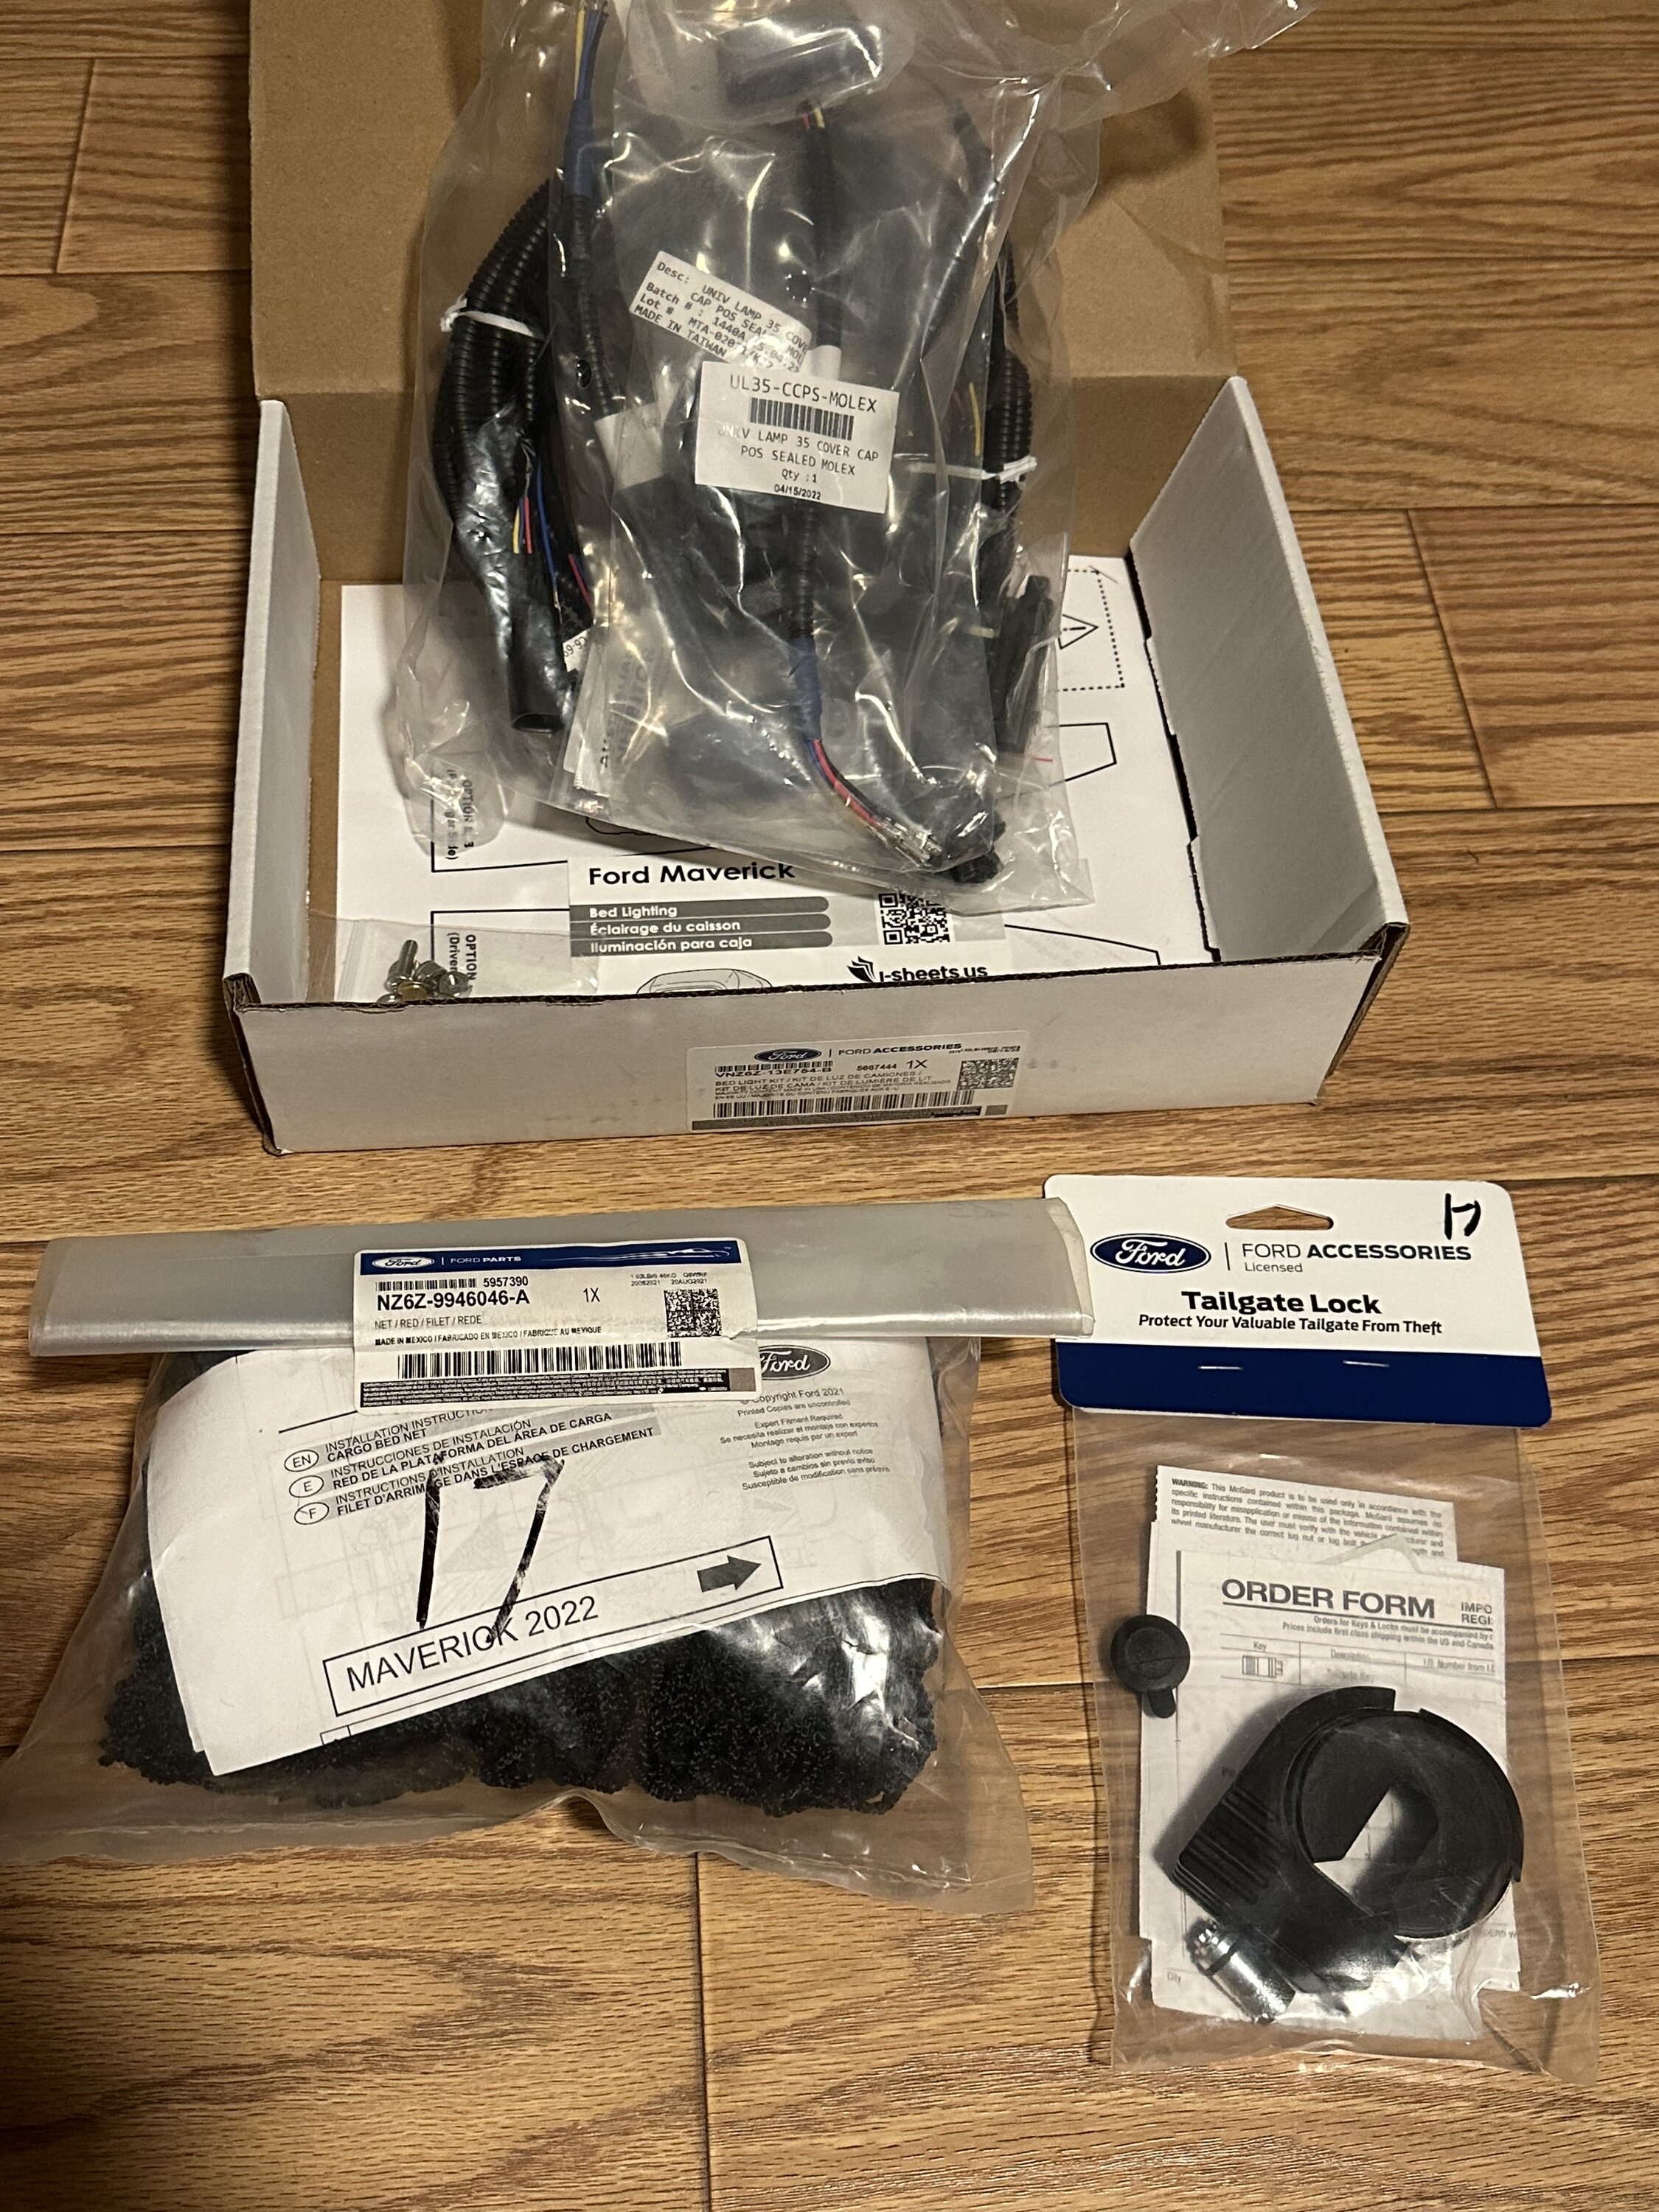 Ford Maverick OEM add-on parts, new in packages IMG_1243